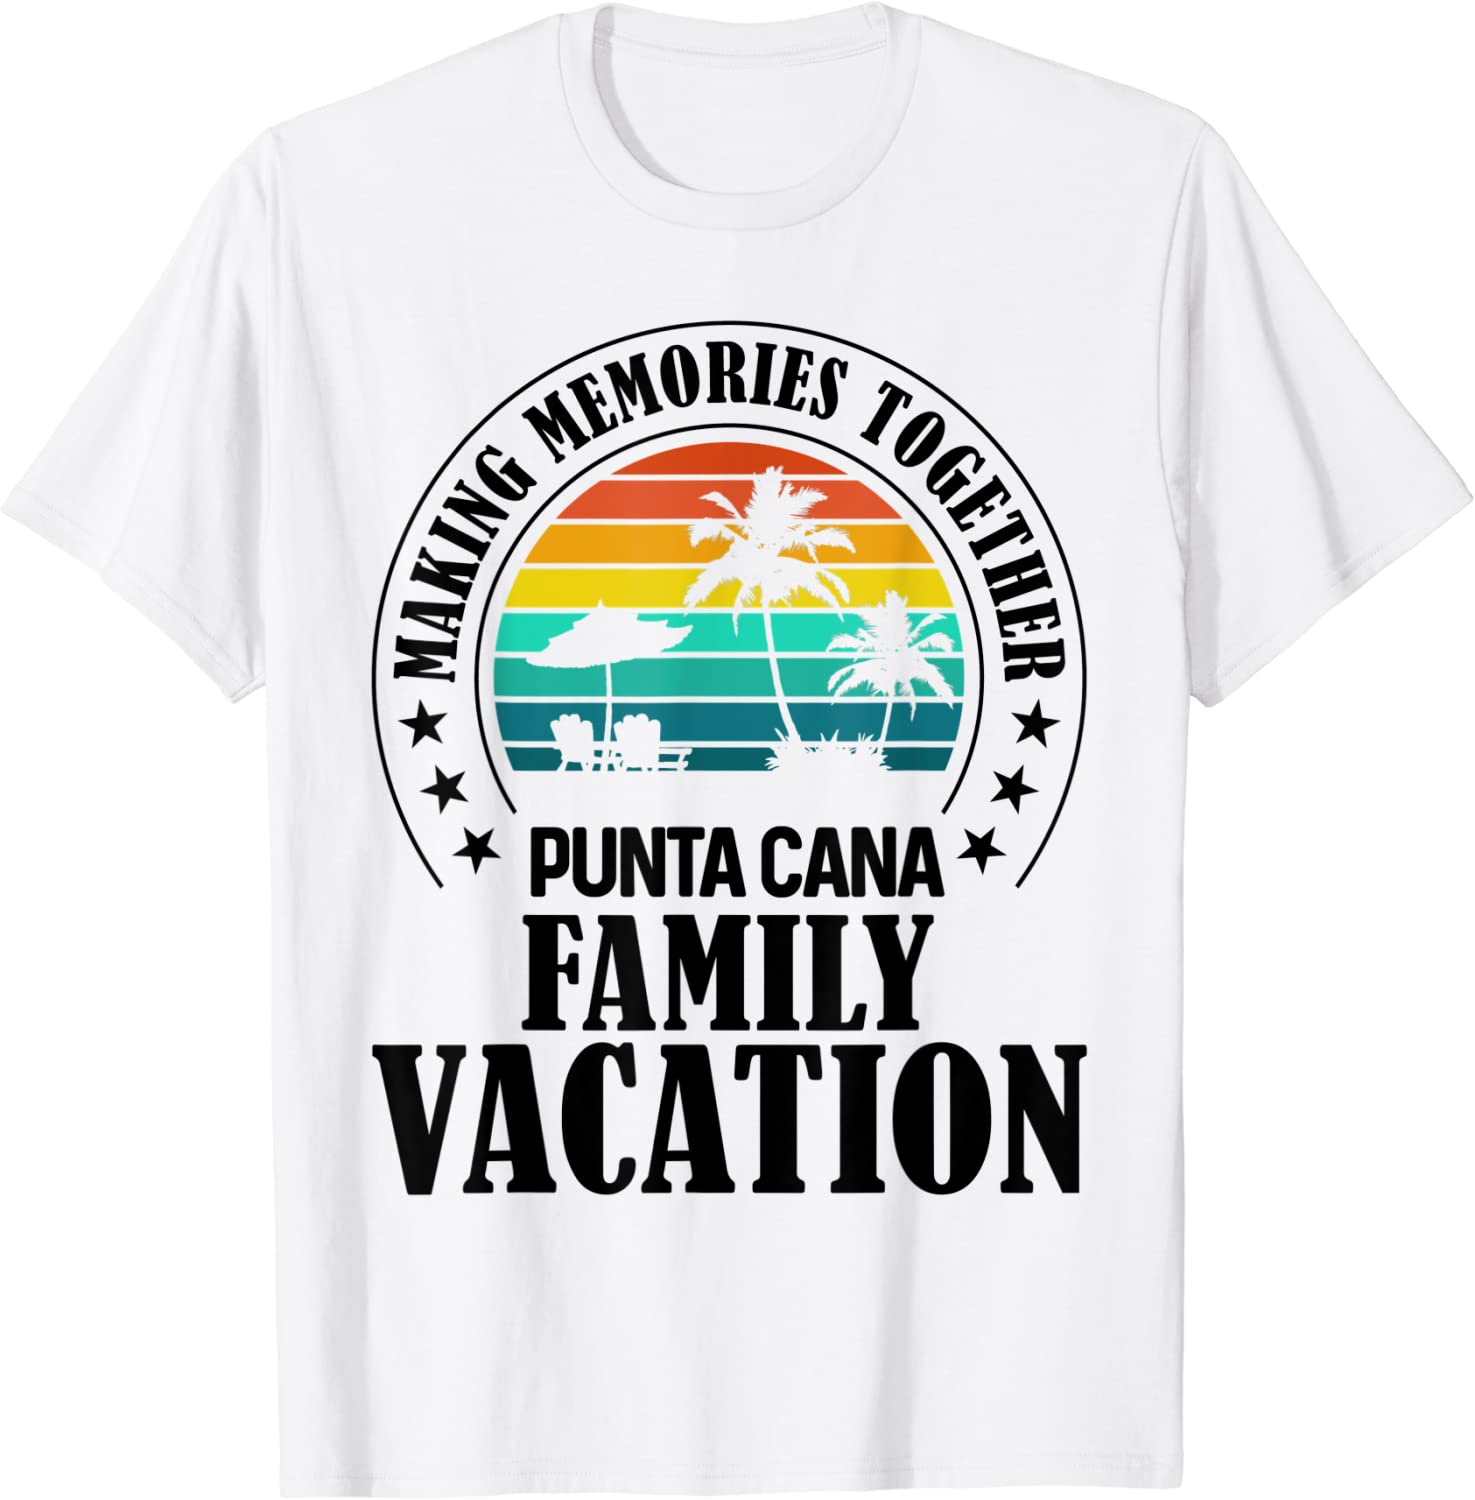 Punta Cana Family Vacation 2022 Making Memories Together Classic Shirt ...